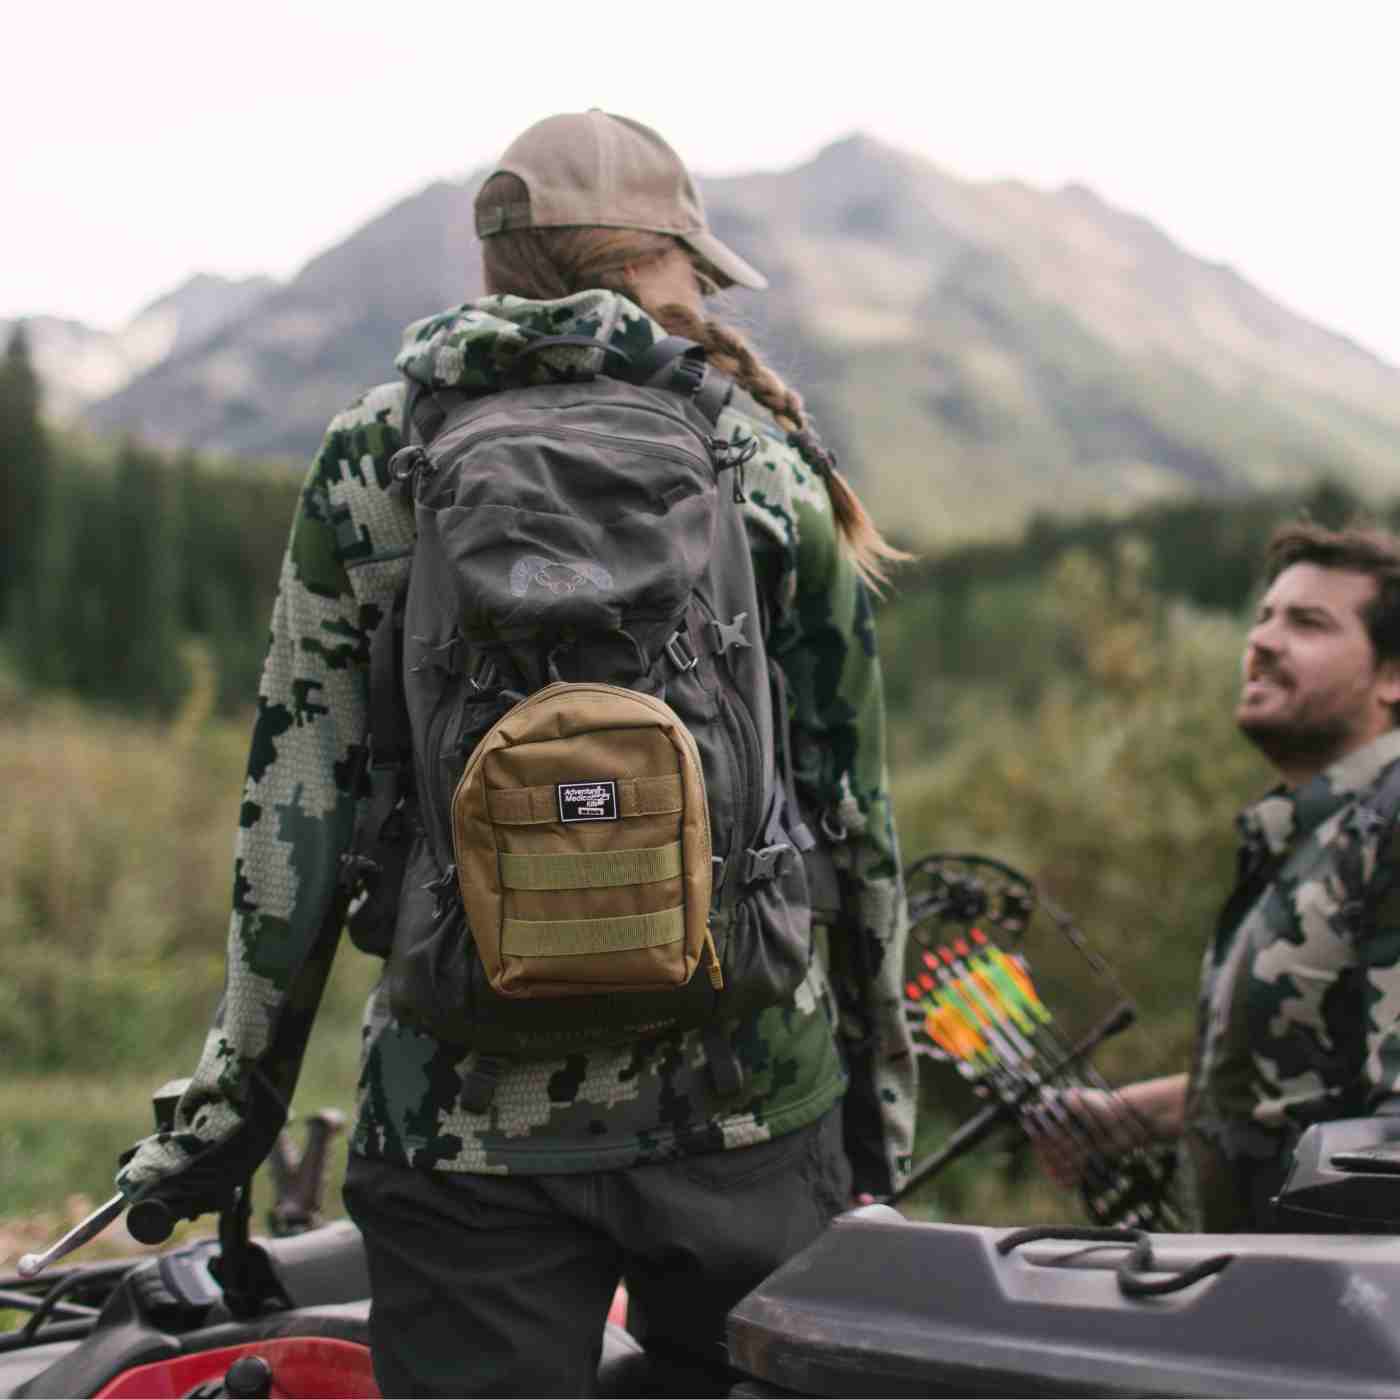 MOLLE Bag Trauma Kit 1.0 - Khaki woman with kit on backpack wearing camo standing on ATV next to man